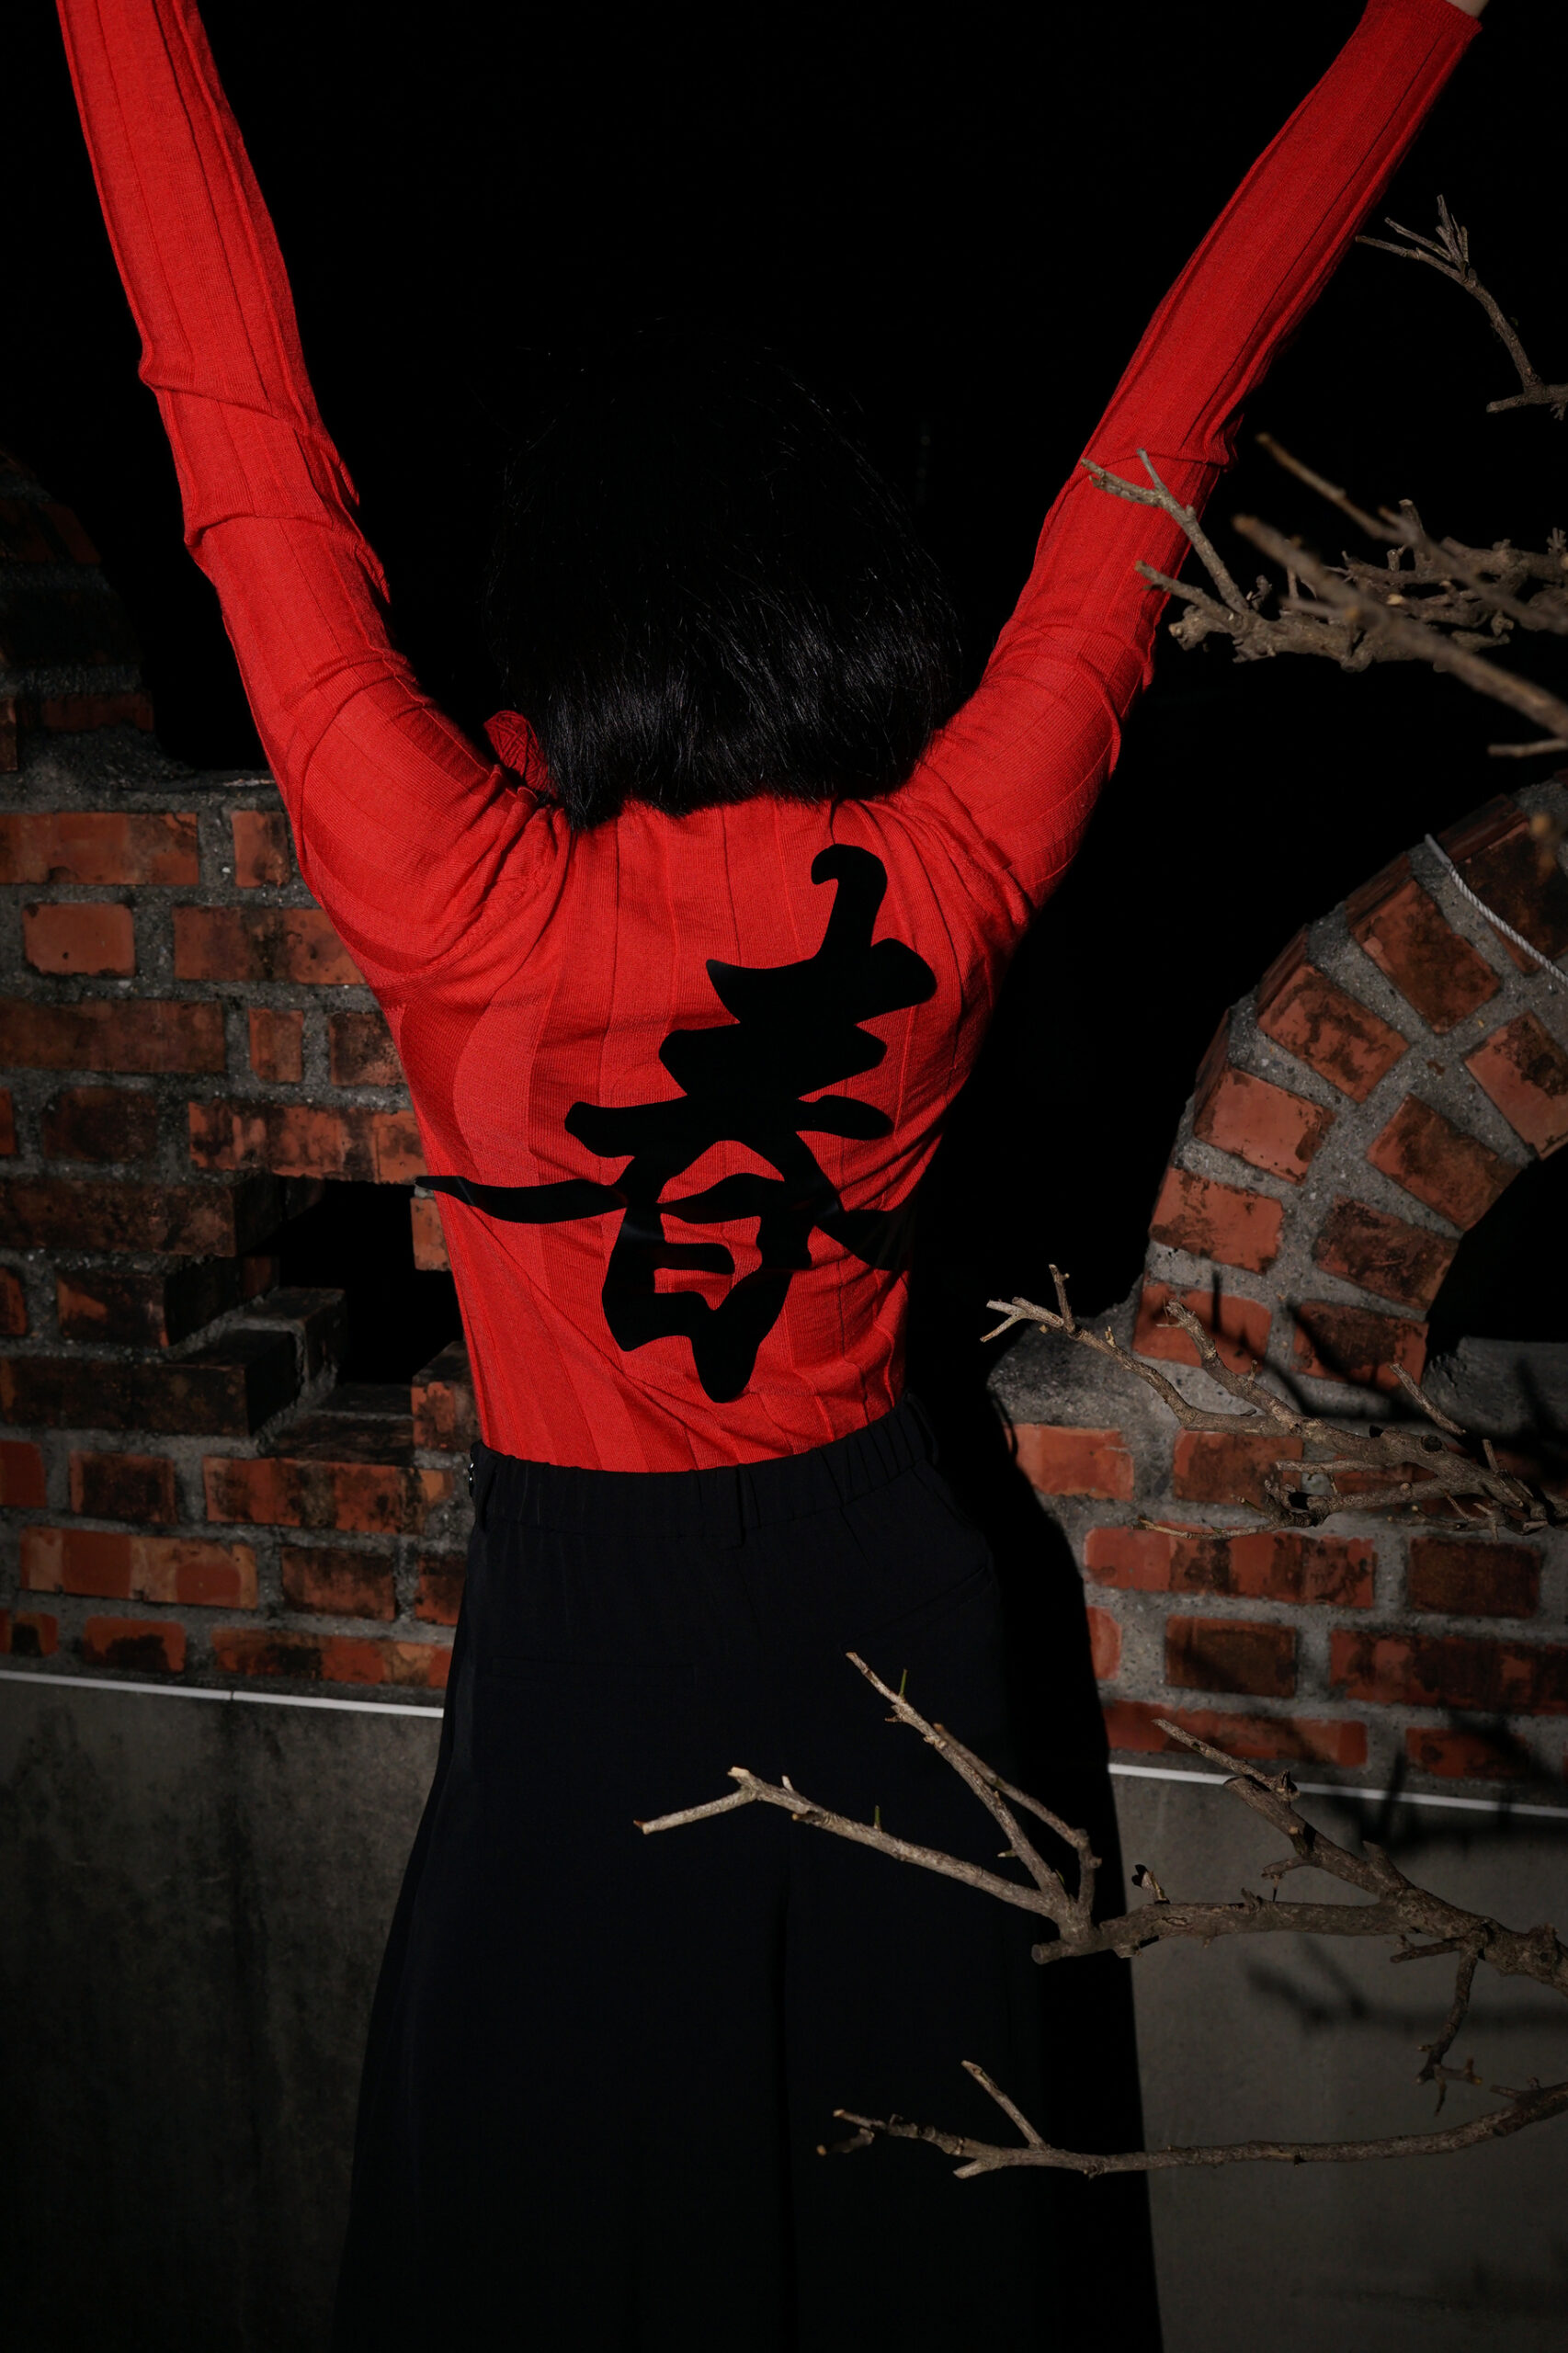 Girl wears Red jacket with asian character on the back with both arm raised, new a dark brick background